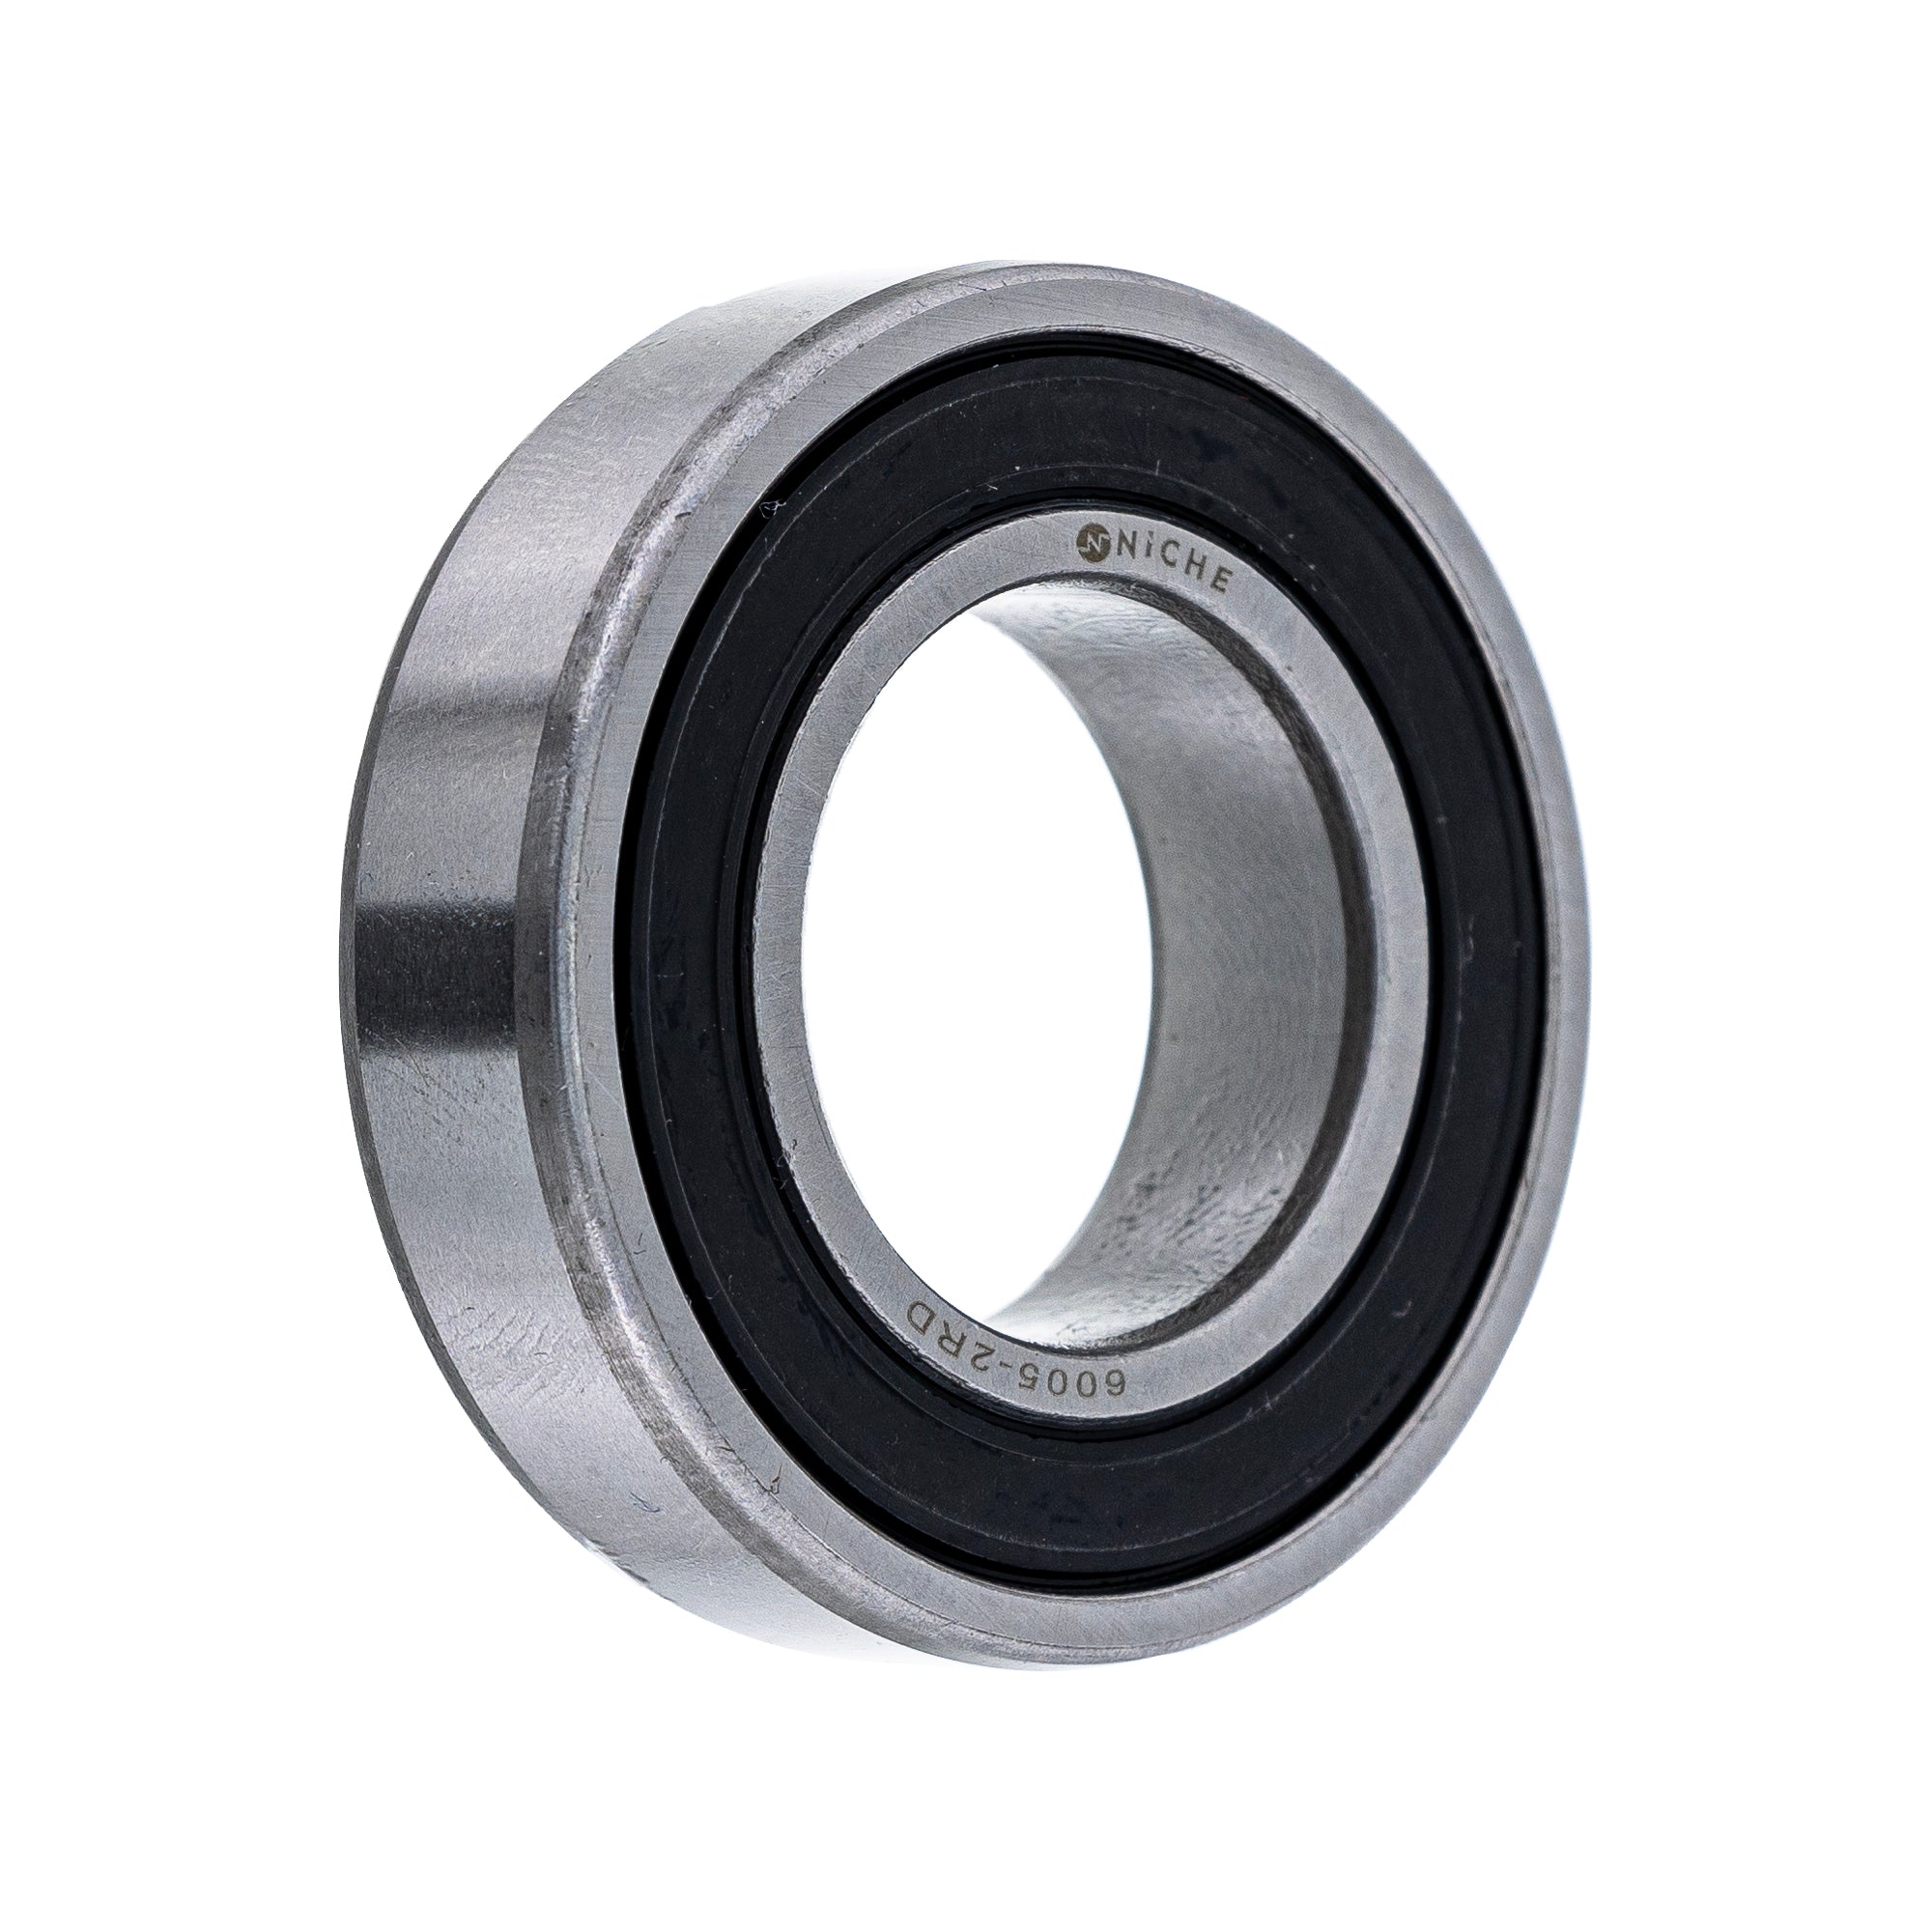 Electric Grade, Single Row, Deep Groove, Ball Bearing for zOTHER RC51 Pro K1100RS K1100LT NICHE 519-CBB2339R